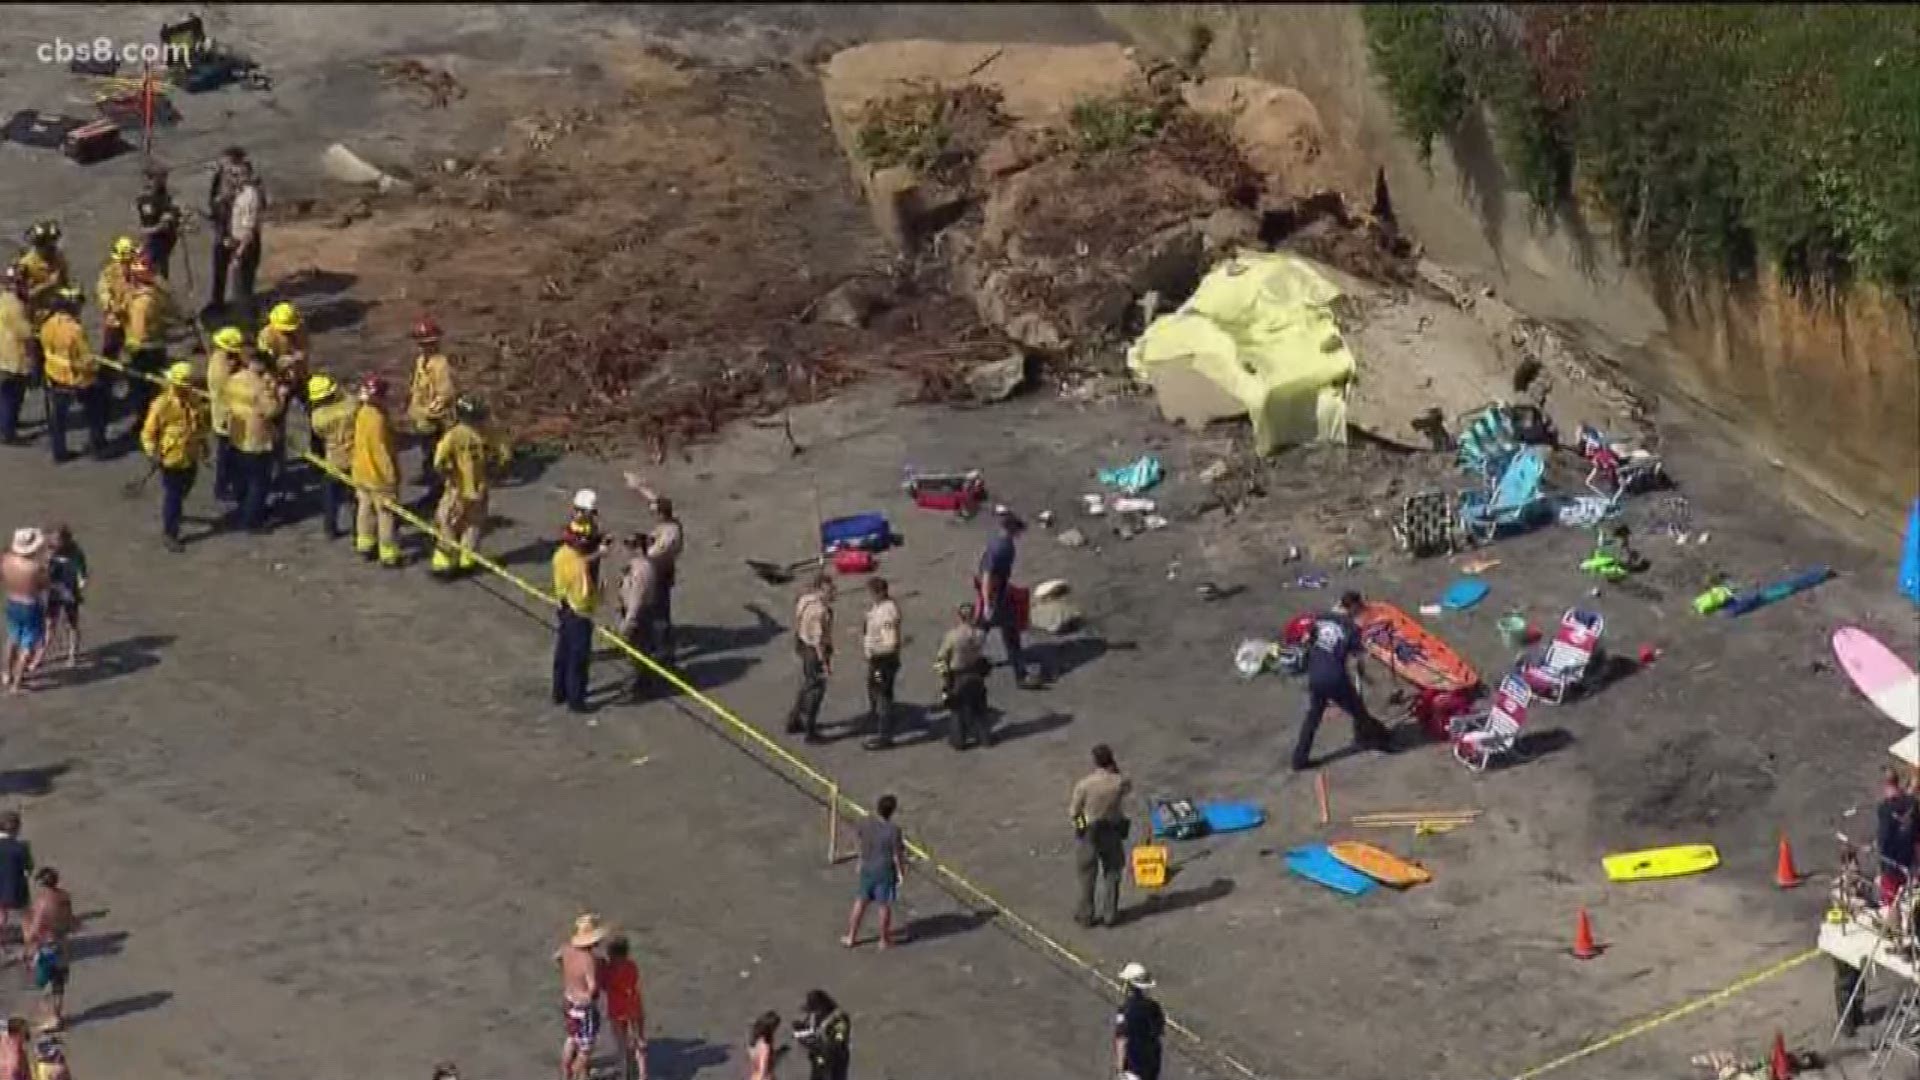 The Medical Examiner on Saturday identified two of the three victims killed Friday afternoon when a bluff collapse on a beach in Leucadia, Encinitas. Grandview Beach access was reopened Saturday morning with the affected area remaining cordoned off and additional signage has been posted.